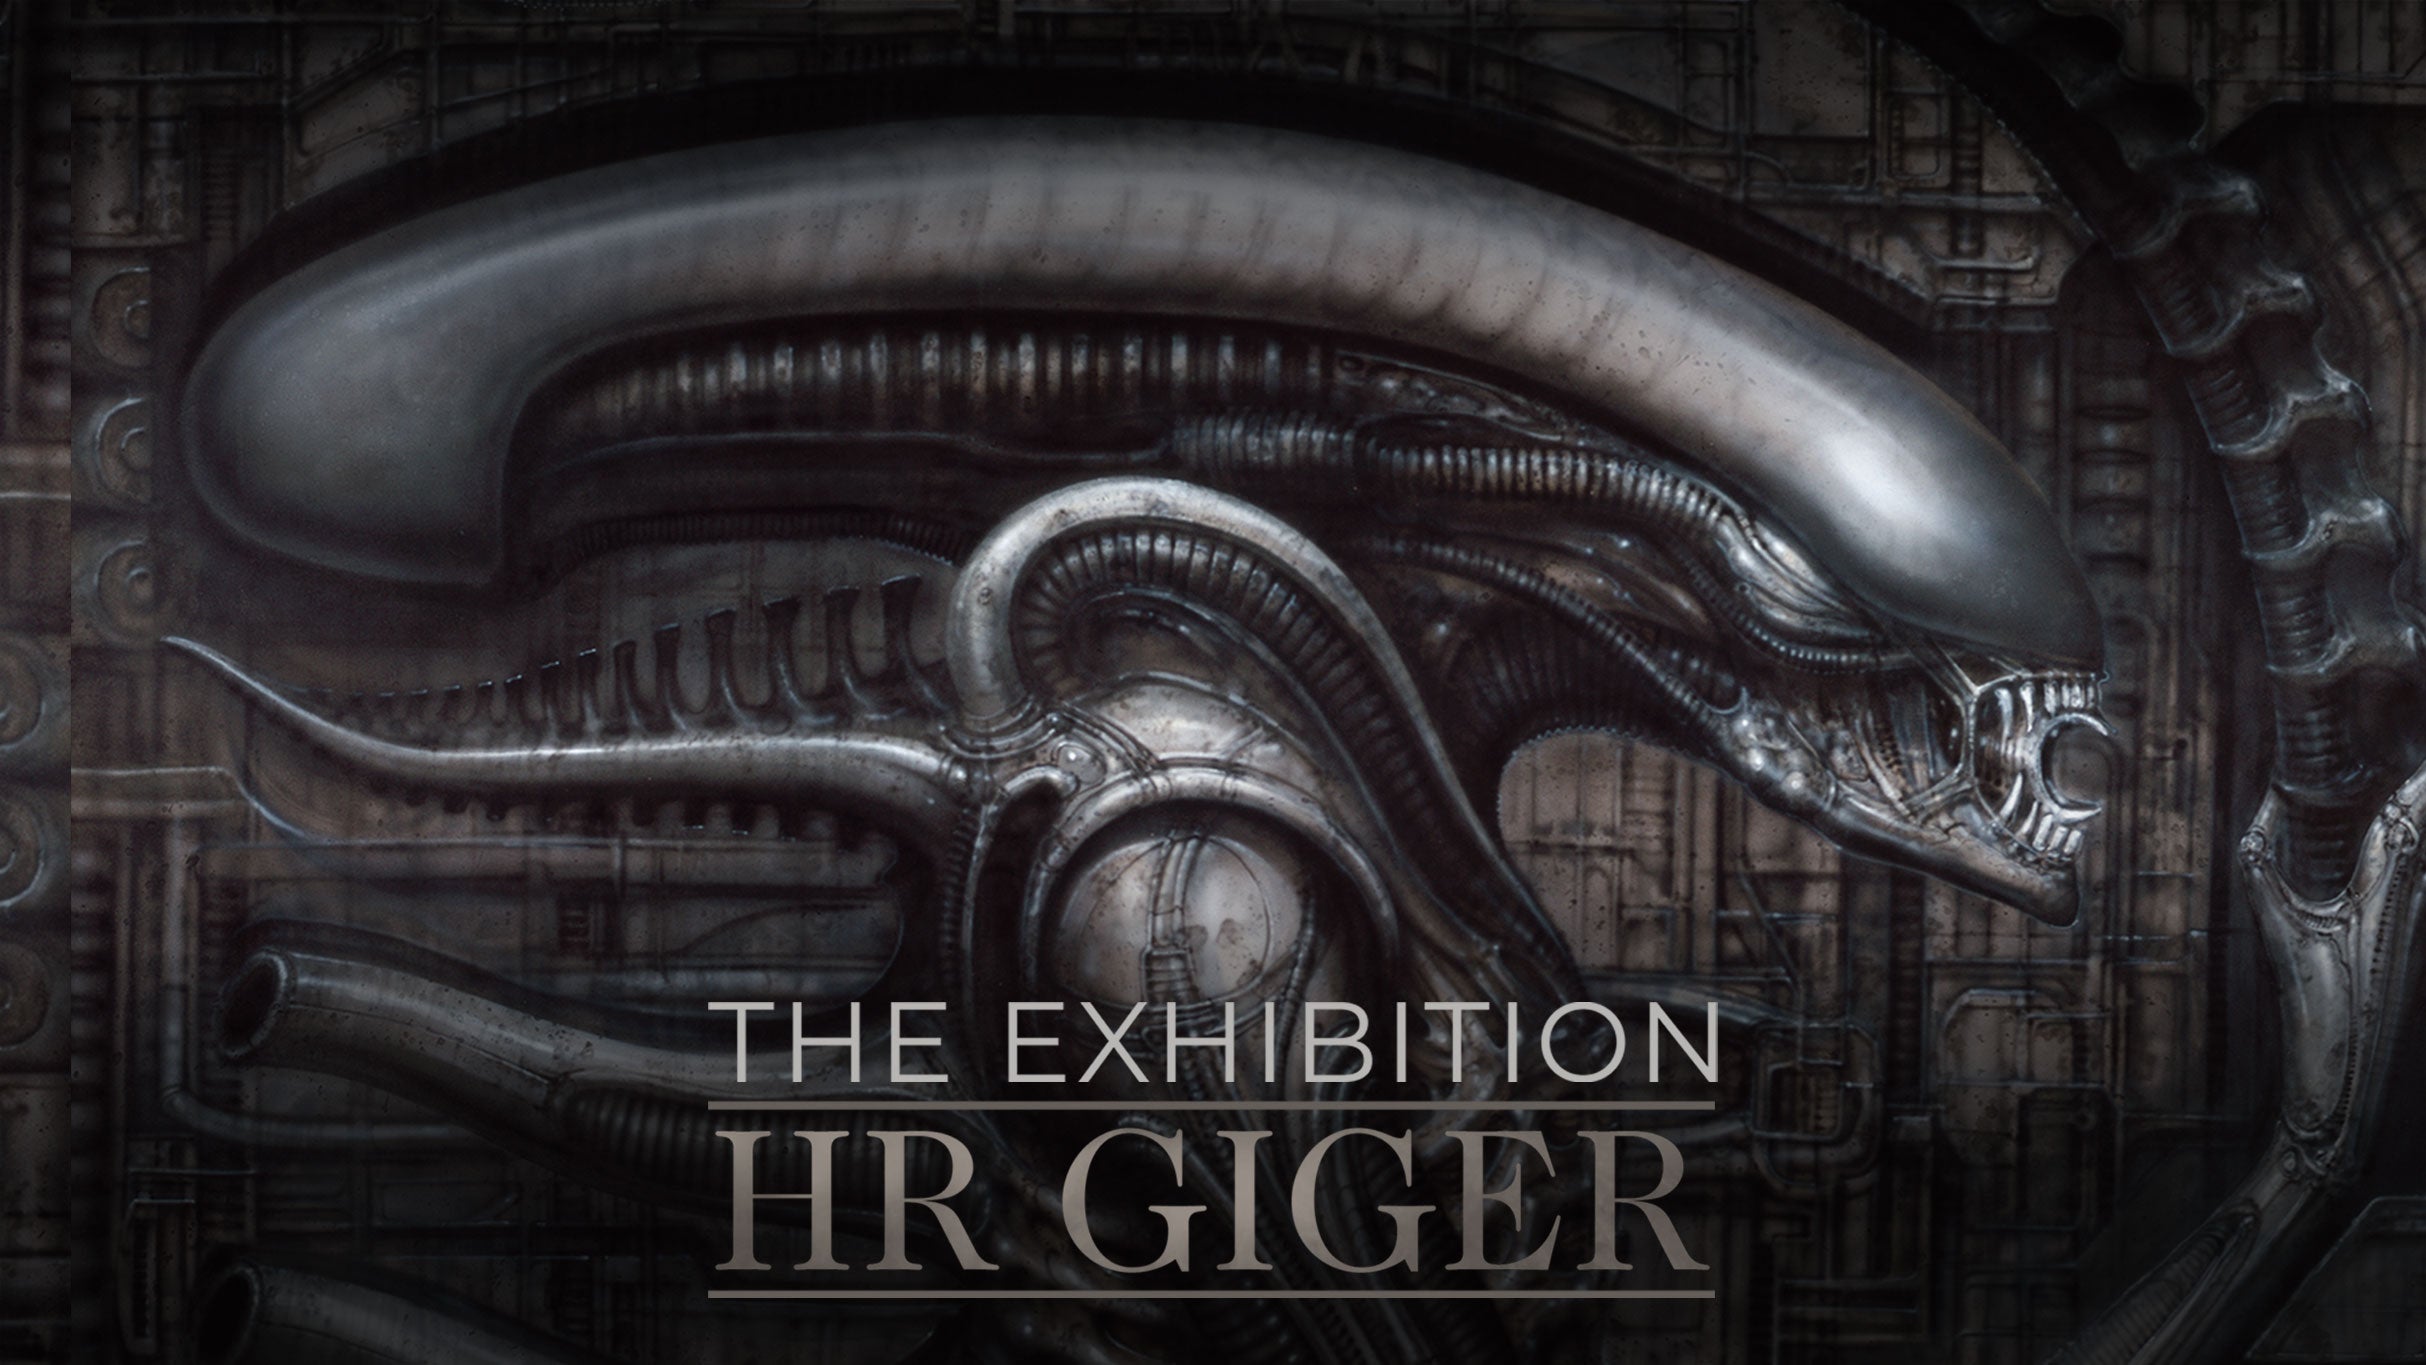 Main image for event titled H.R Giger Exhibition “Alone with the Night”